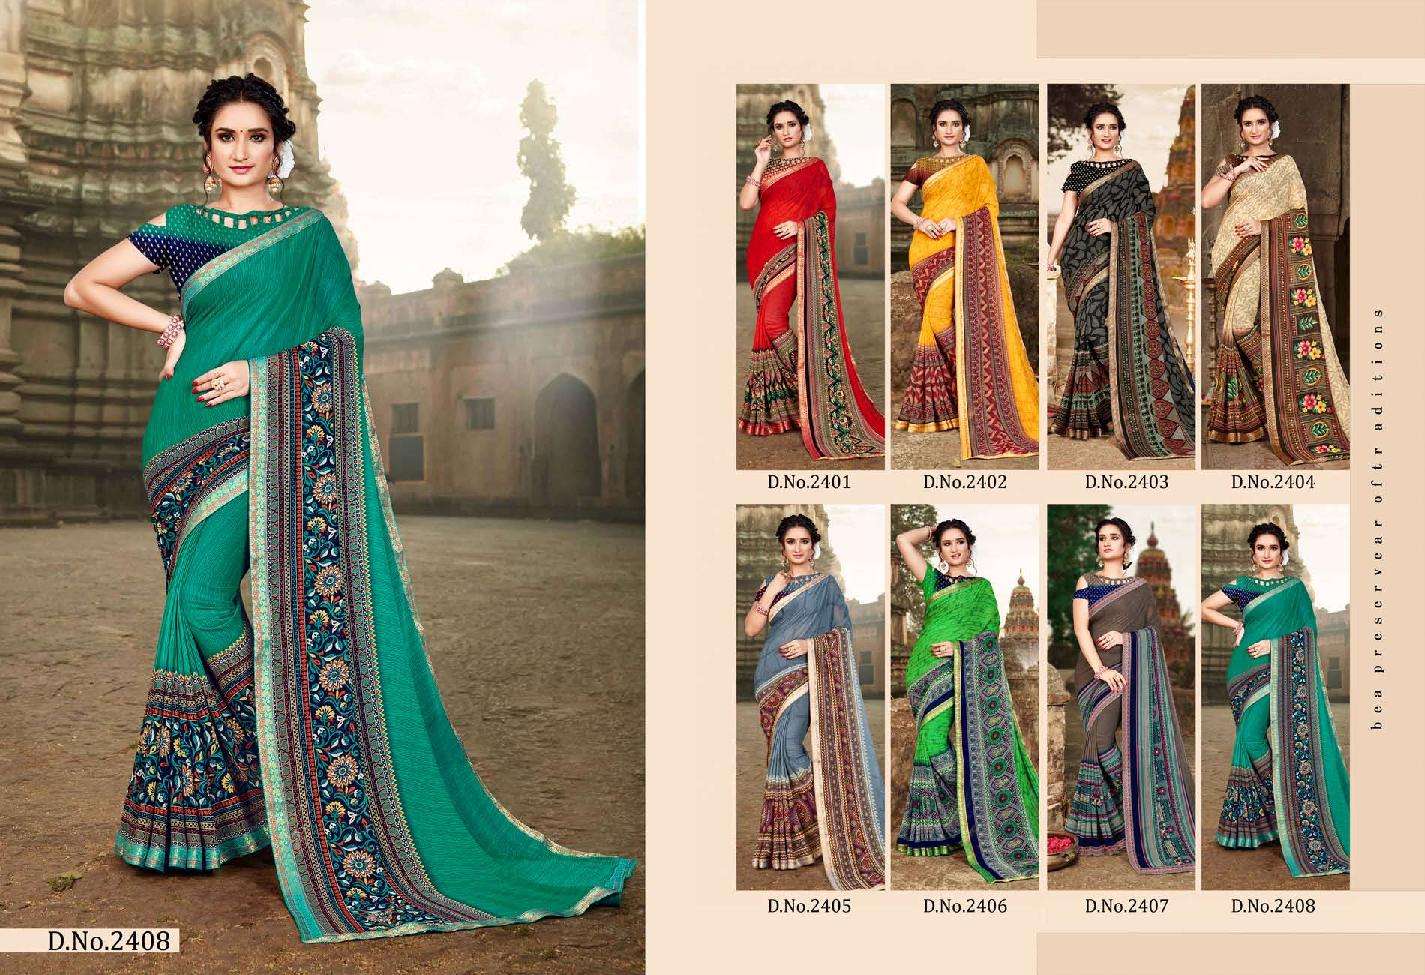 HI SELECTION LAUNCHES BLOSSOM WEIGHTLESS PRINTED SAREES